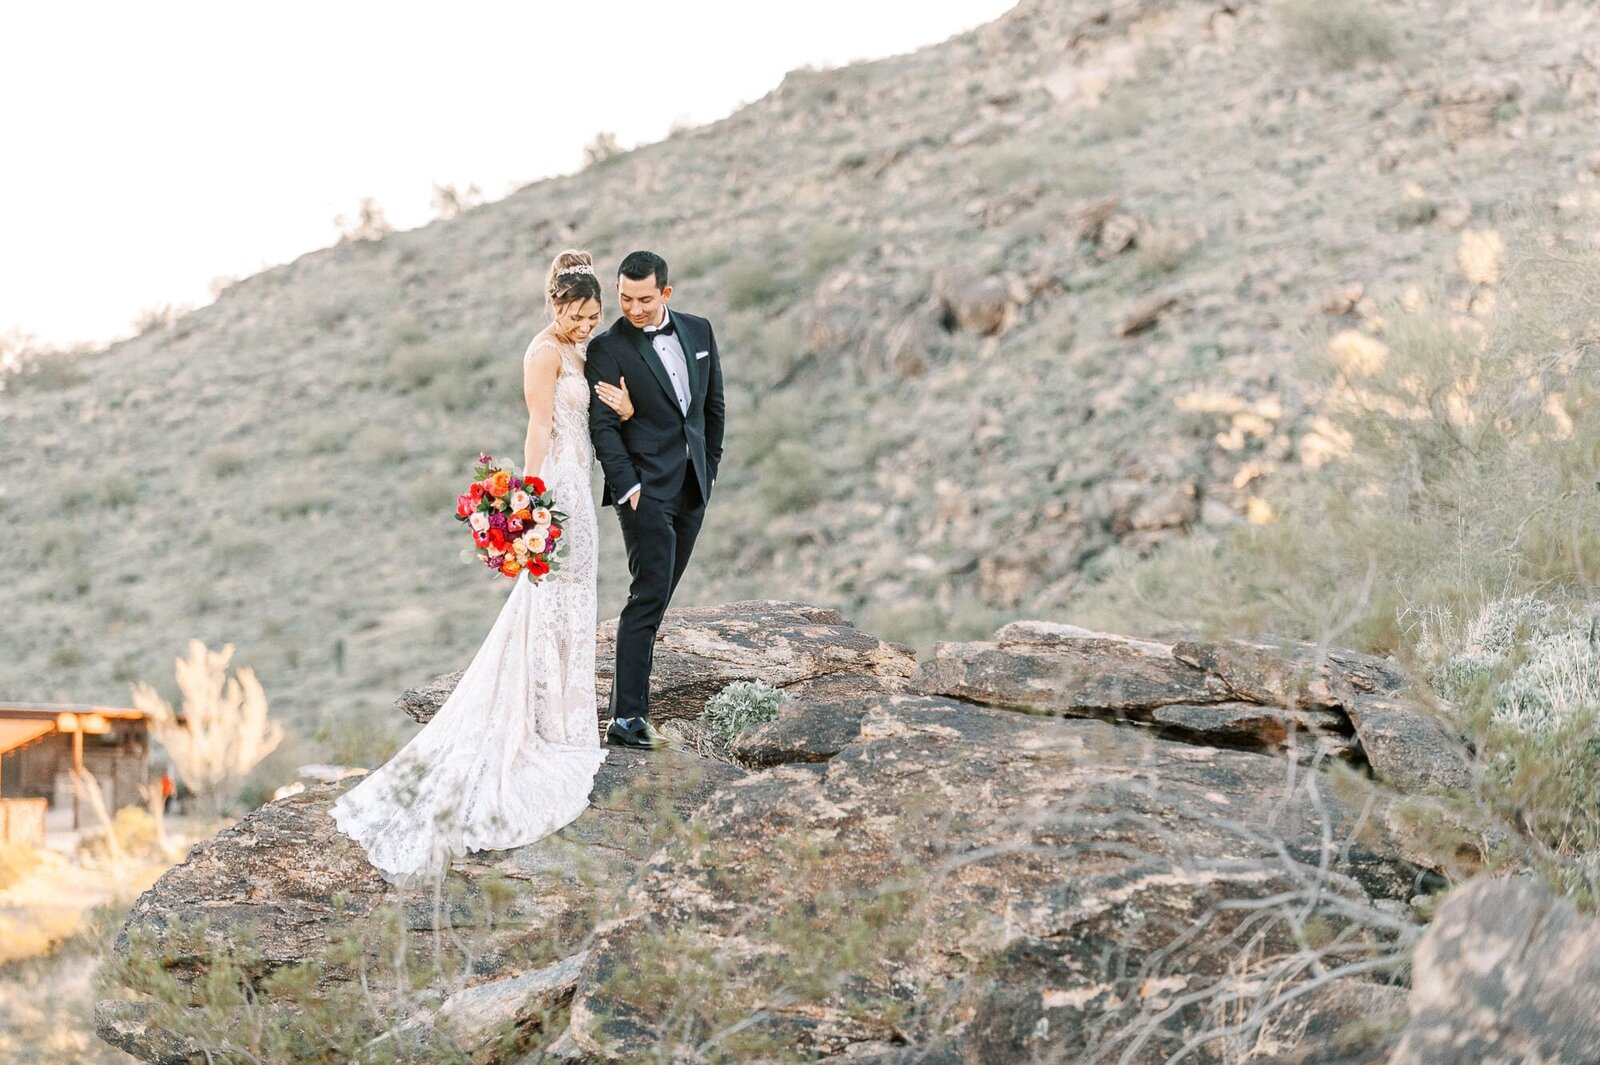 Bride and groom at South Mountain.